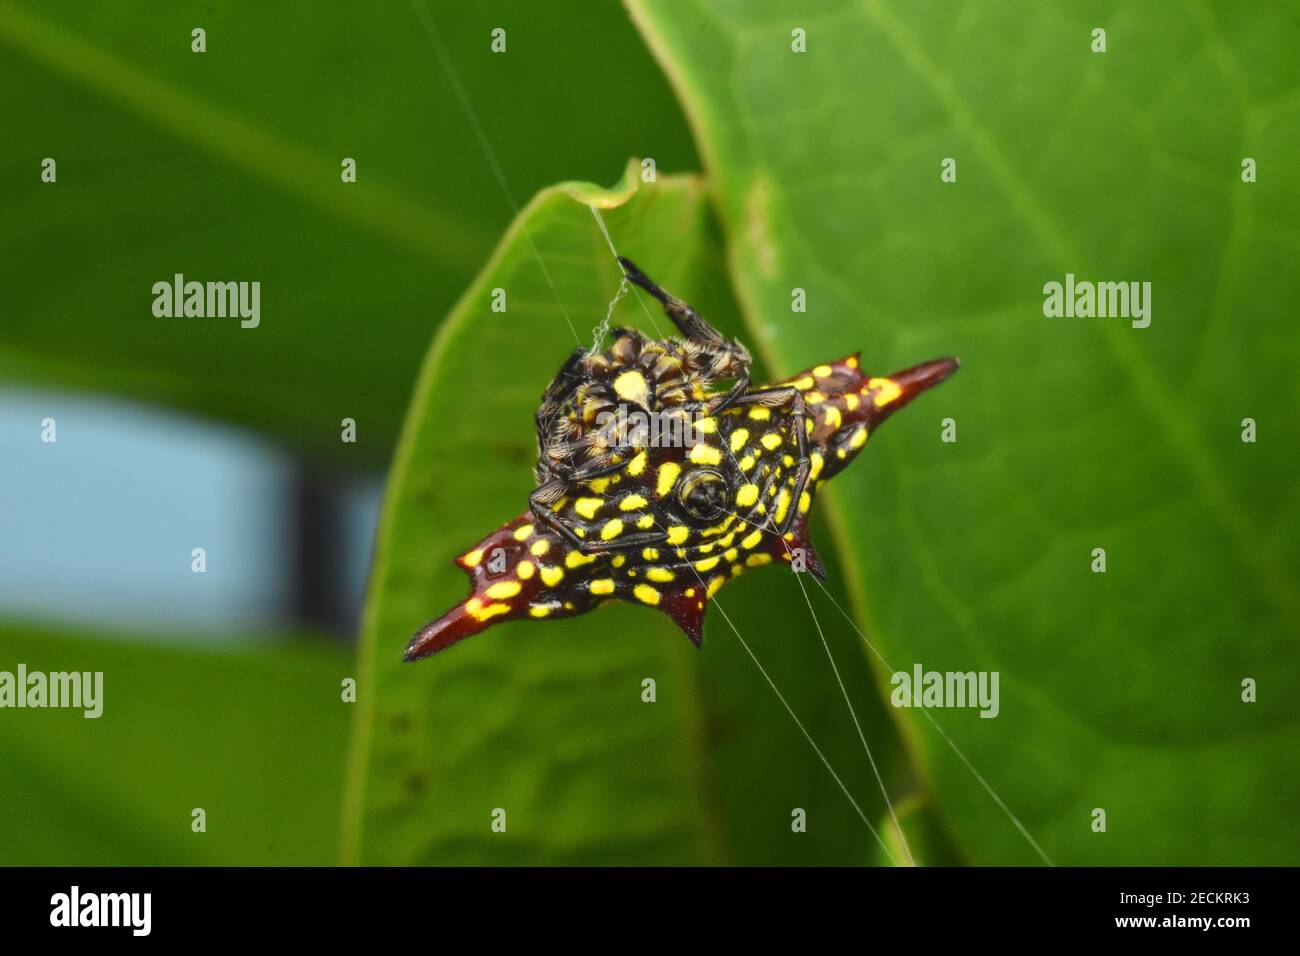 Yellow spiny orb spider, abdominal view Stock Photo